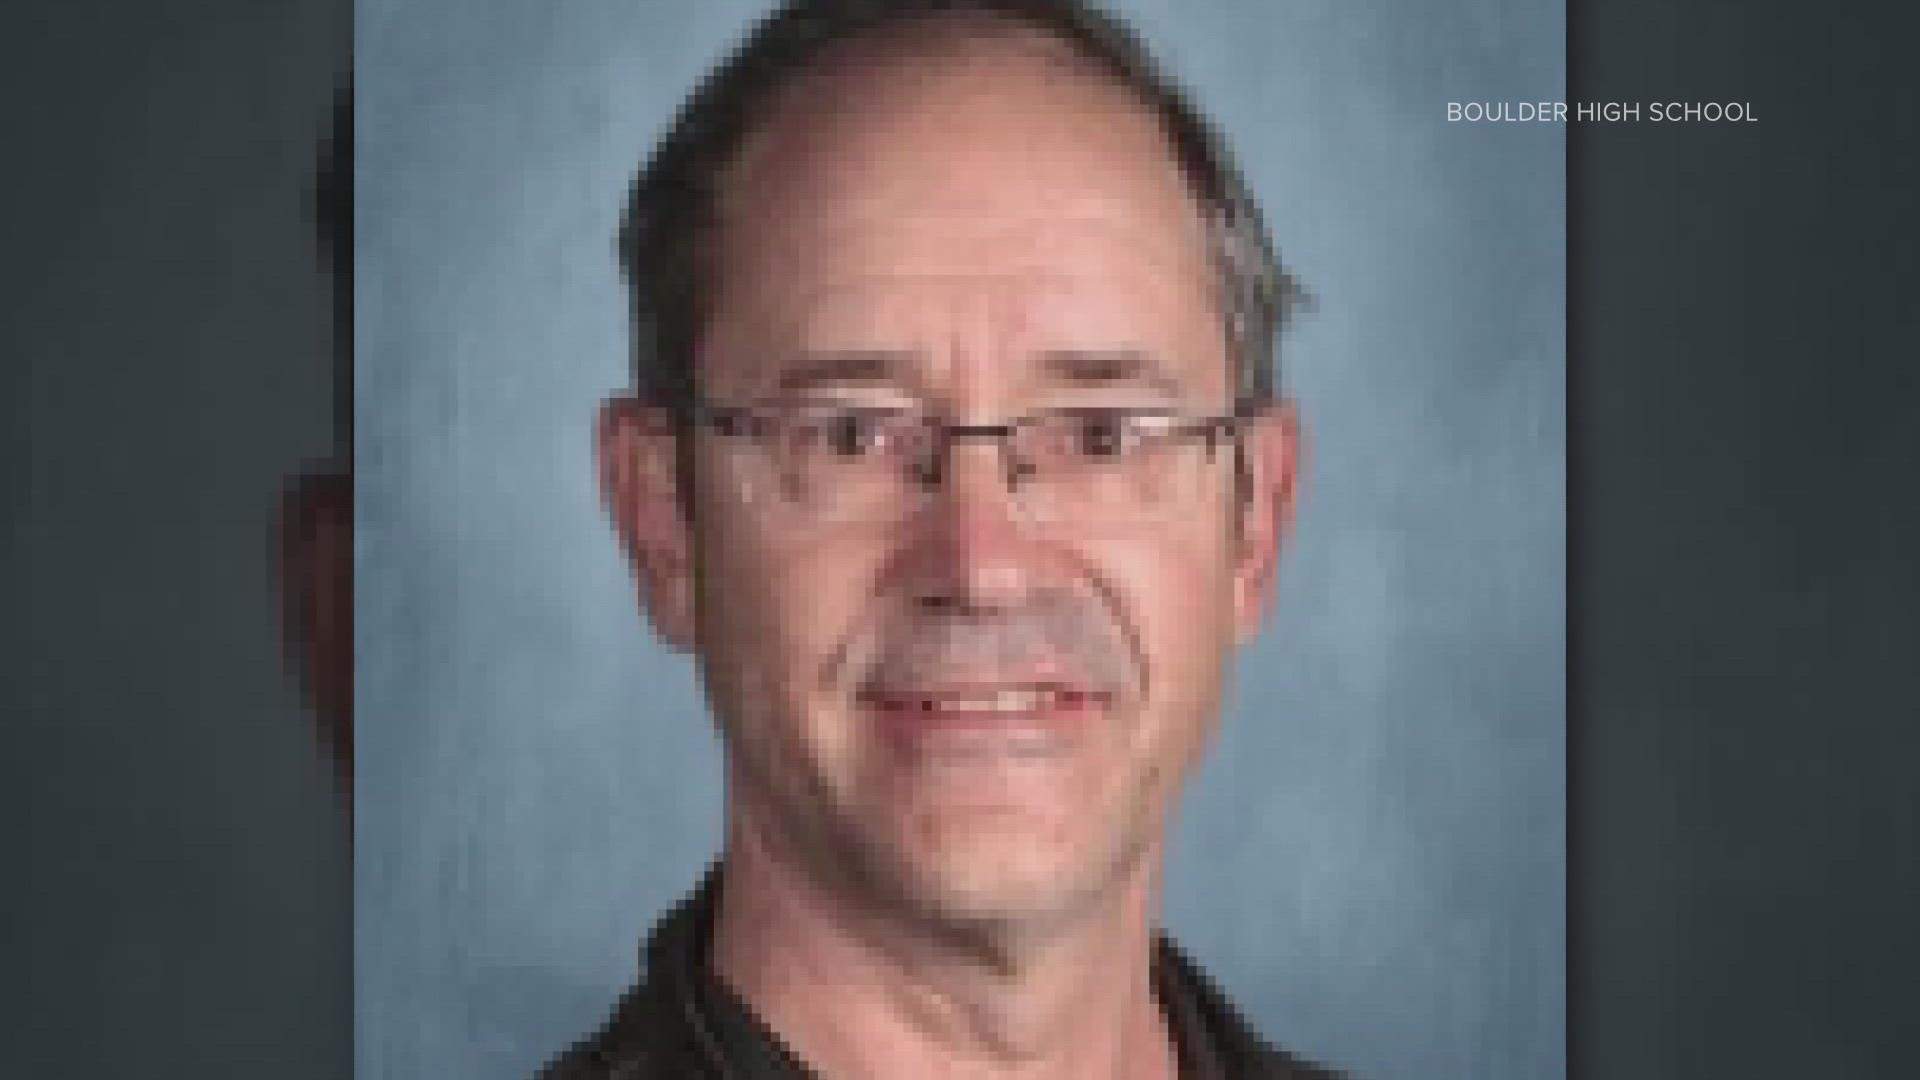 A Boulder High School teacher was one of two people killed in a small plane crash in Nebraska last week, the Boulder Valley School District said.